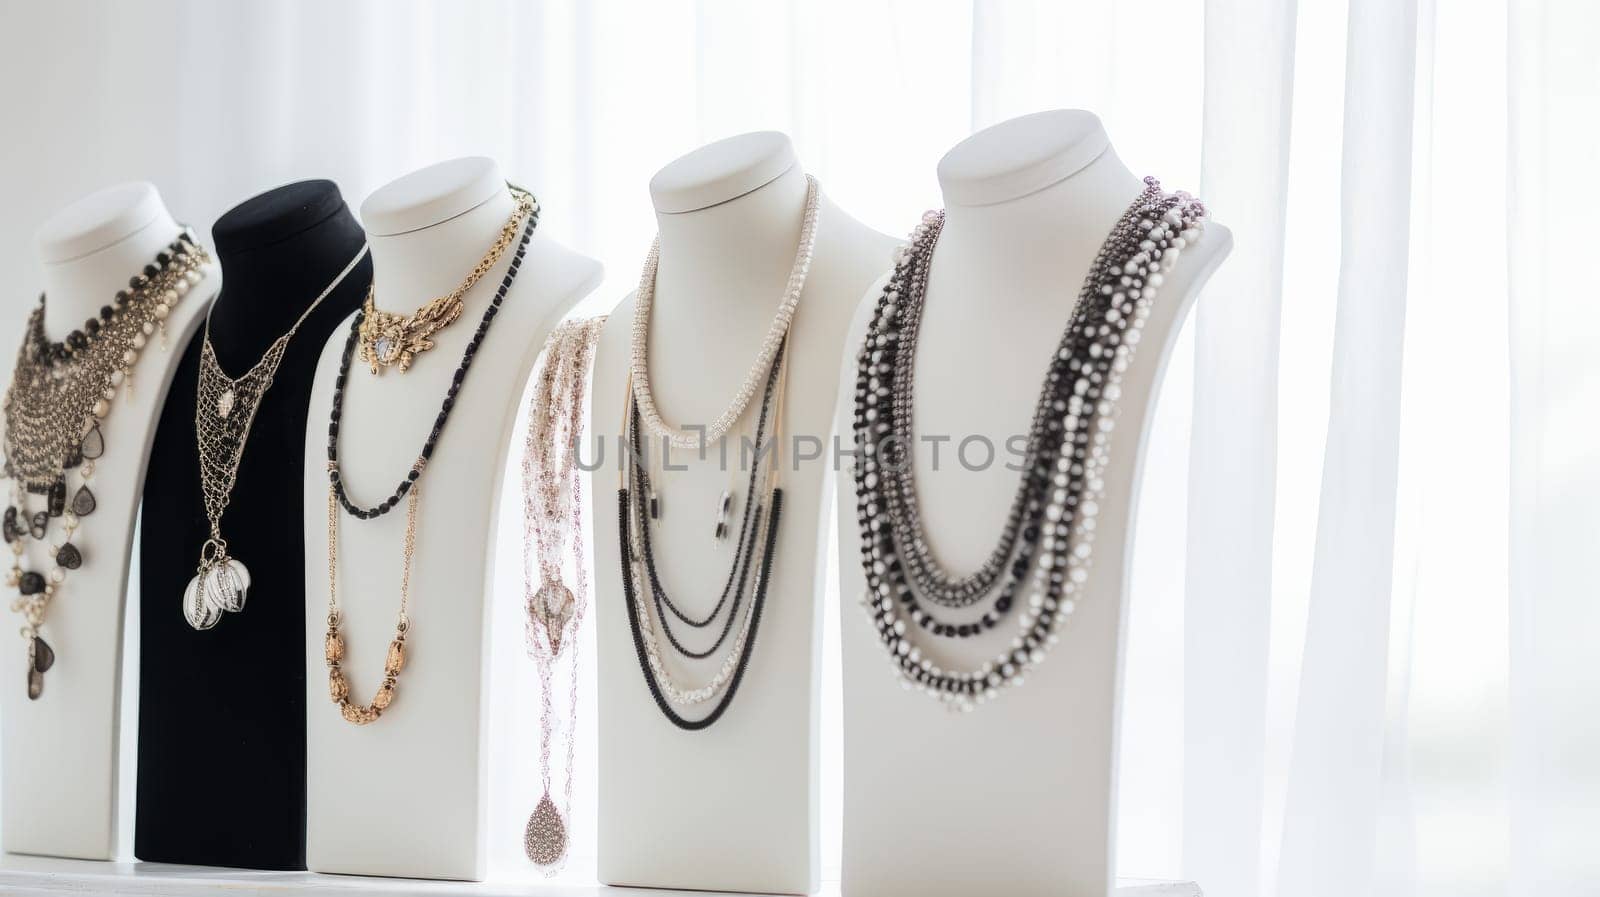 Five necklace busts on white background. Different styles and colors of necklaces. Gold, silver, pearl and black beads. Great for themes of jewelry, fashion and beauty. by DogDrawHand